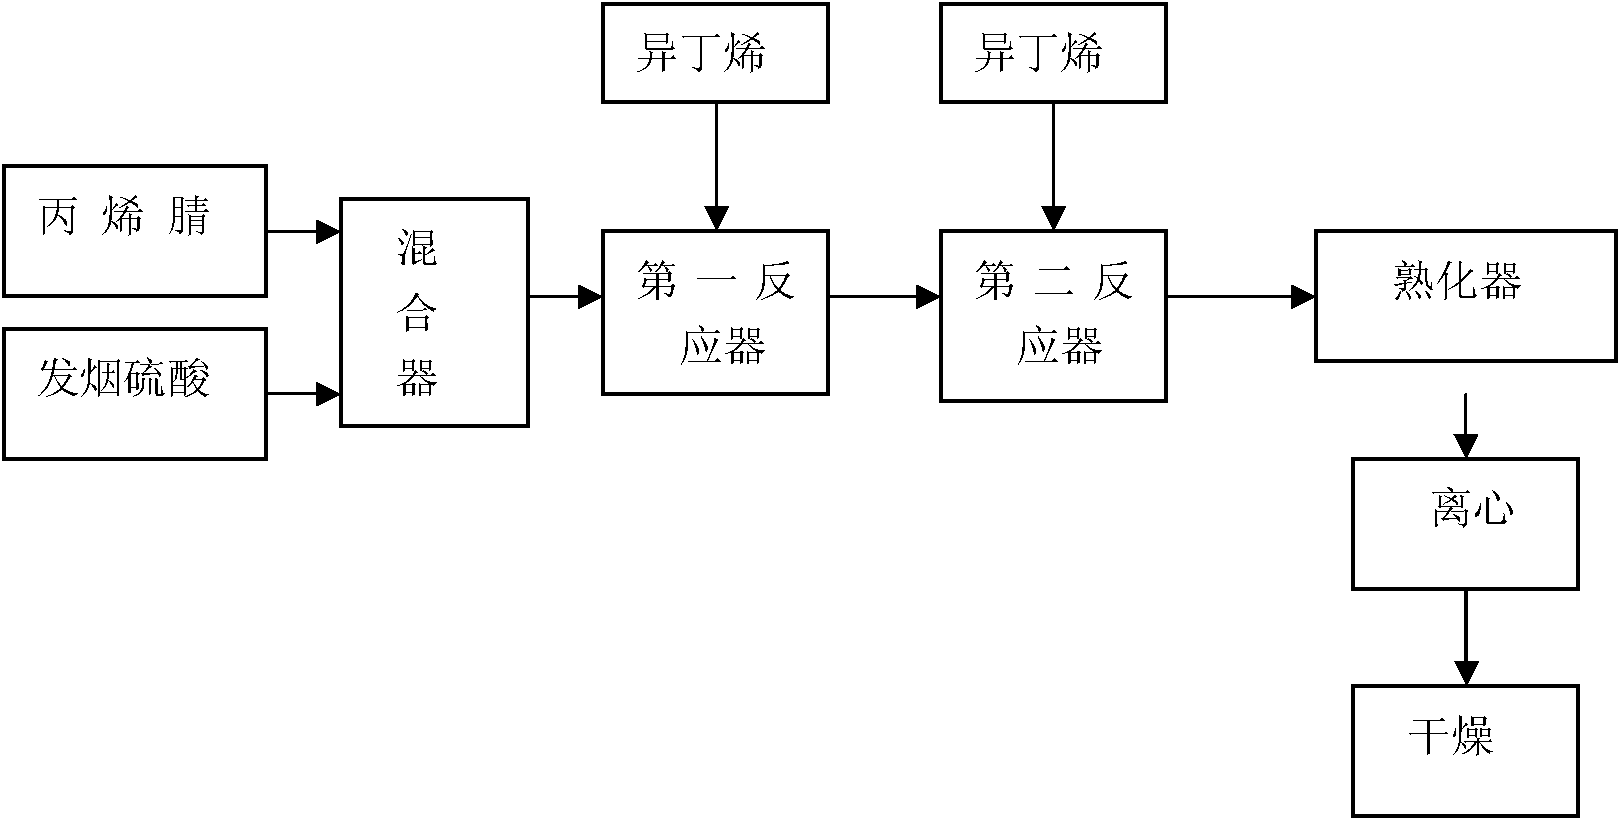 Synthesis process for 2-acrylamido-2-methyl propane sulfonic acid through continuous method